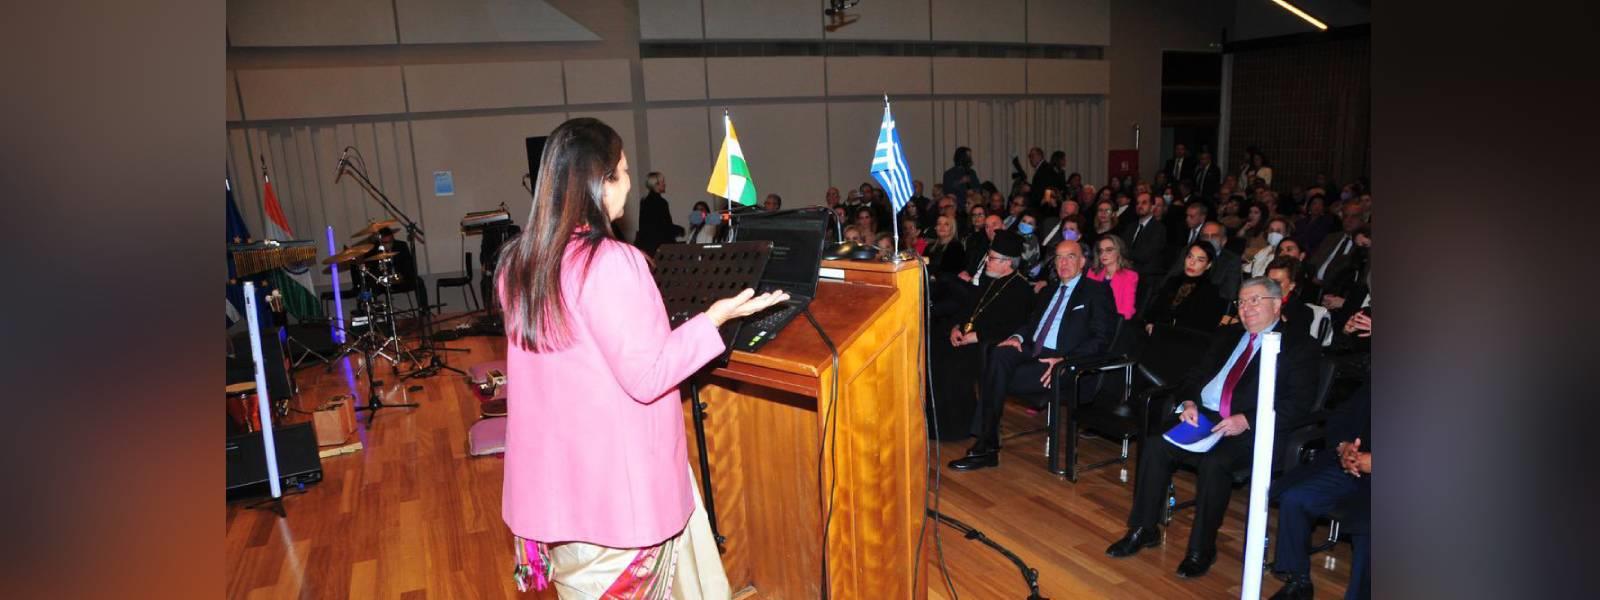 Minister of State for External Affairs, Smt. Meenakashi Lekhi attended the 'India-Greece Friendship Event' in Athens